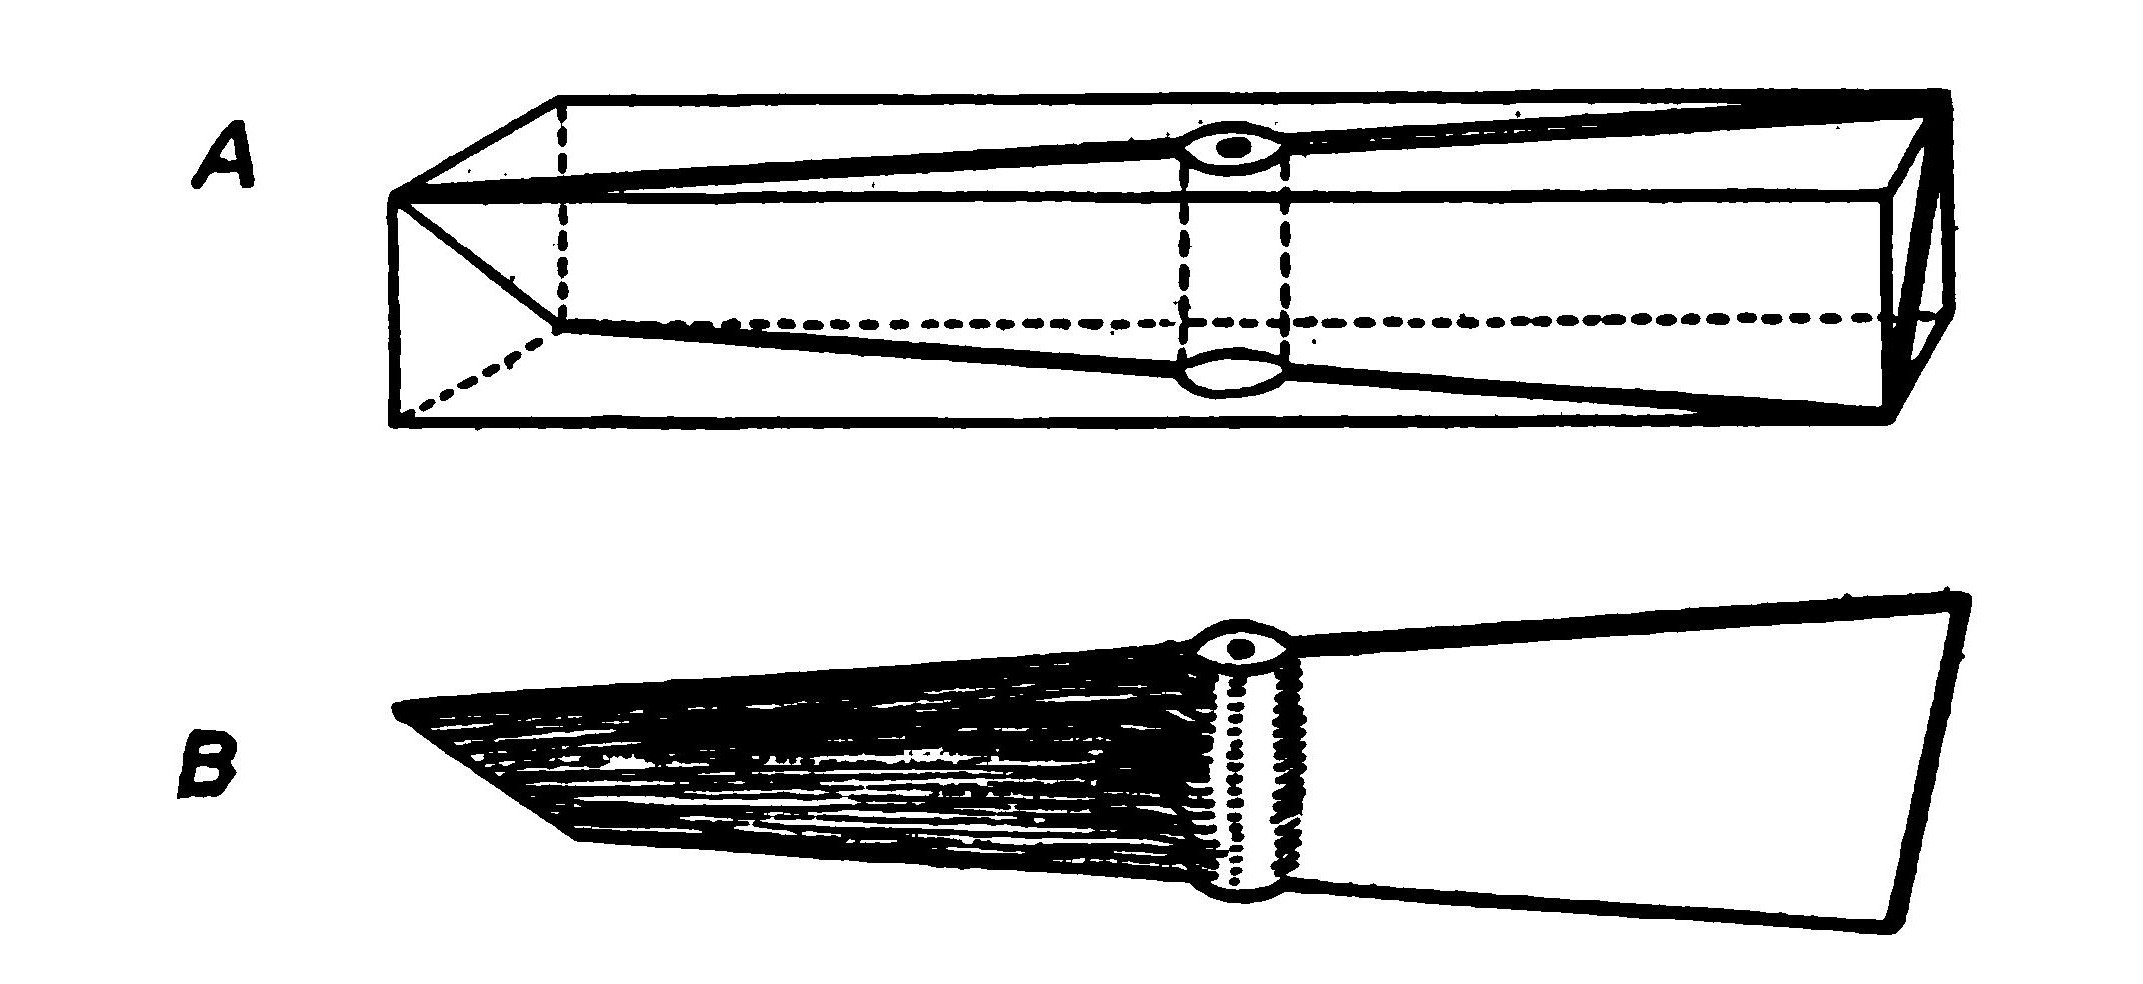 FIG. 32. Method of carving a propeller of the truly helical type.